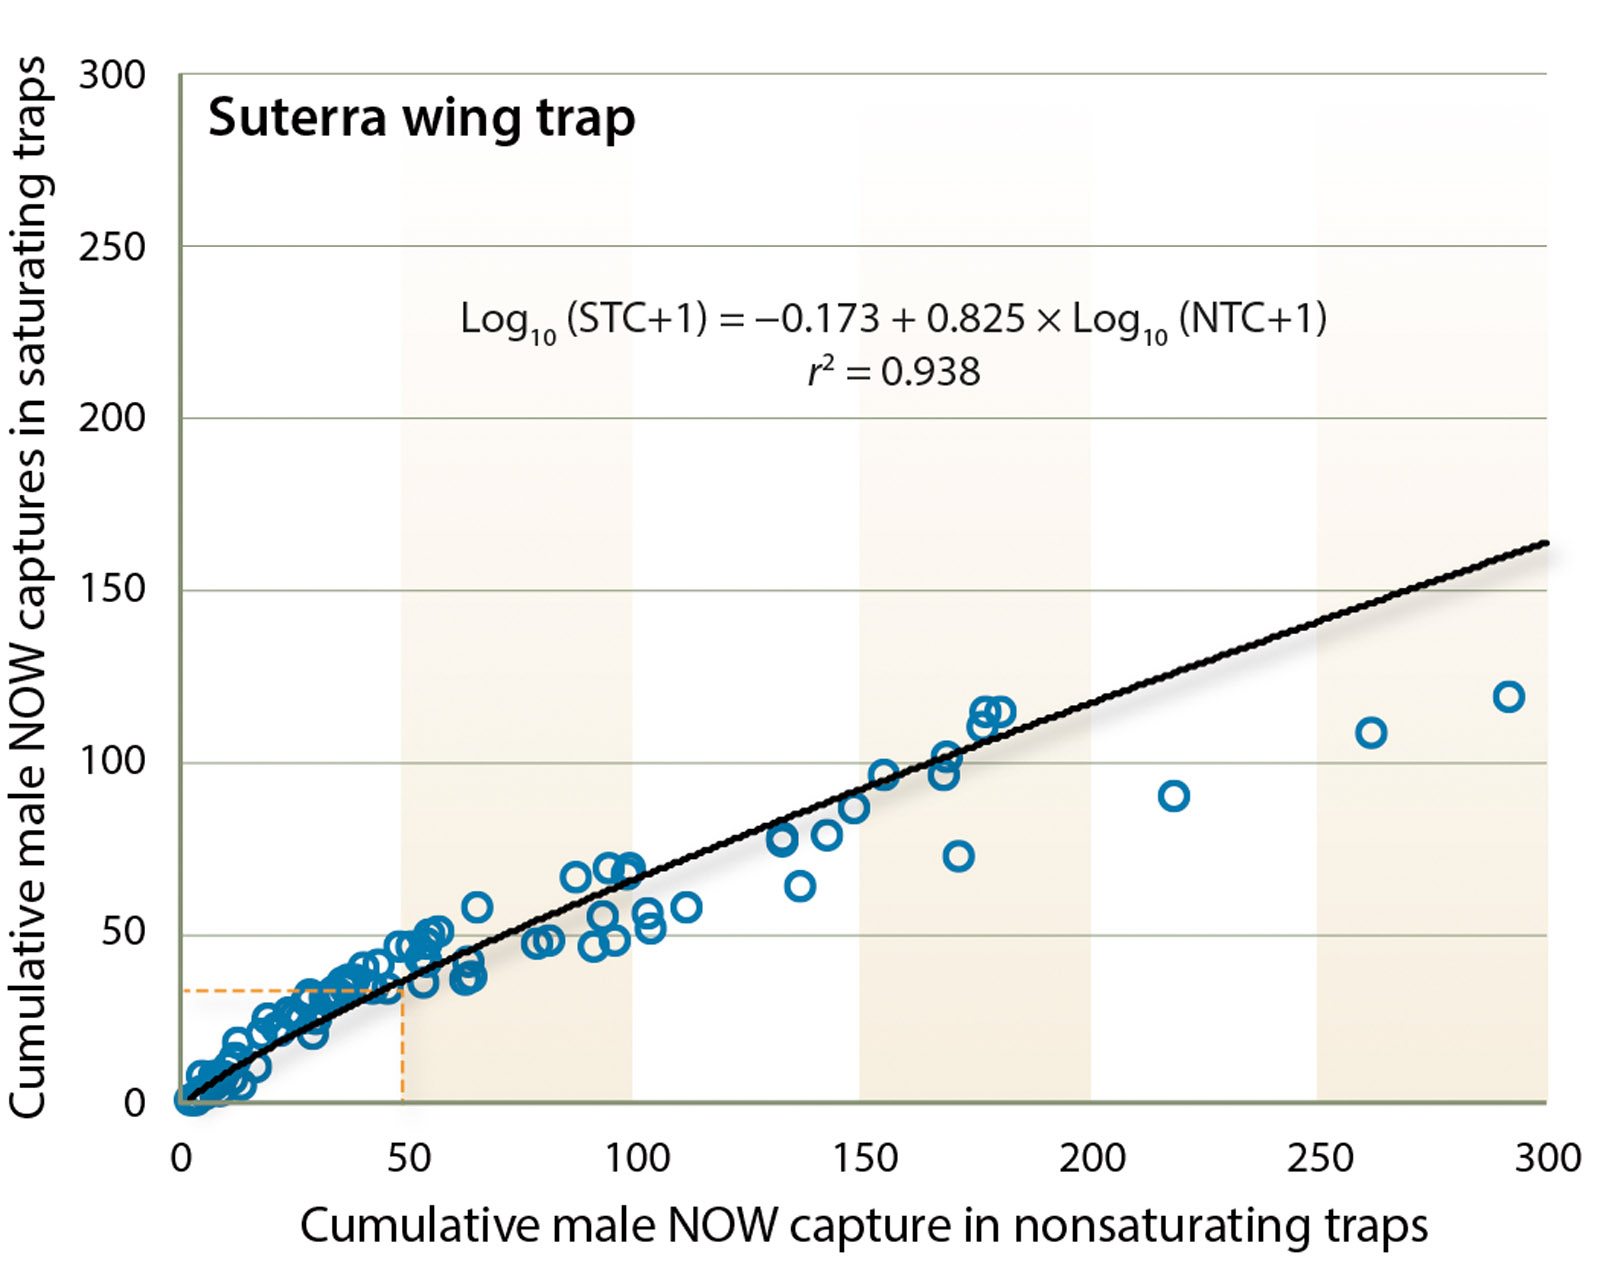 Suterra wing trap. Plot of mean number of moths captured in saturating and nonsaturating traps (n = 5 tests). This is a power relationship described by Log10 (Saturating trap count + 1) = 0.173 + 0.825 × Log10 (Nonsaturating trap count + 1), r2 = 0.94. Dashed vertical and horizontal lines are guides to note deviation of saturating trap counts from nonsaturating trap counts.